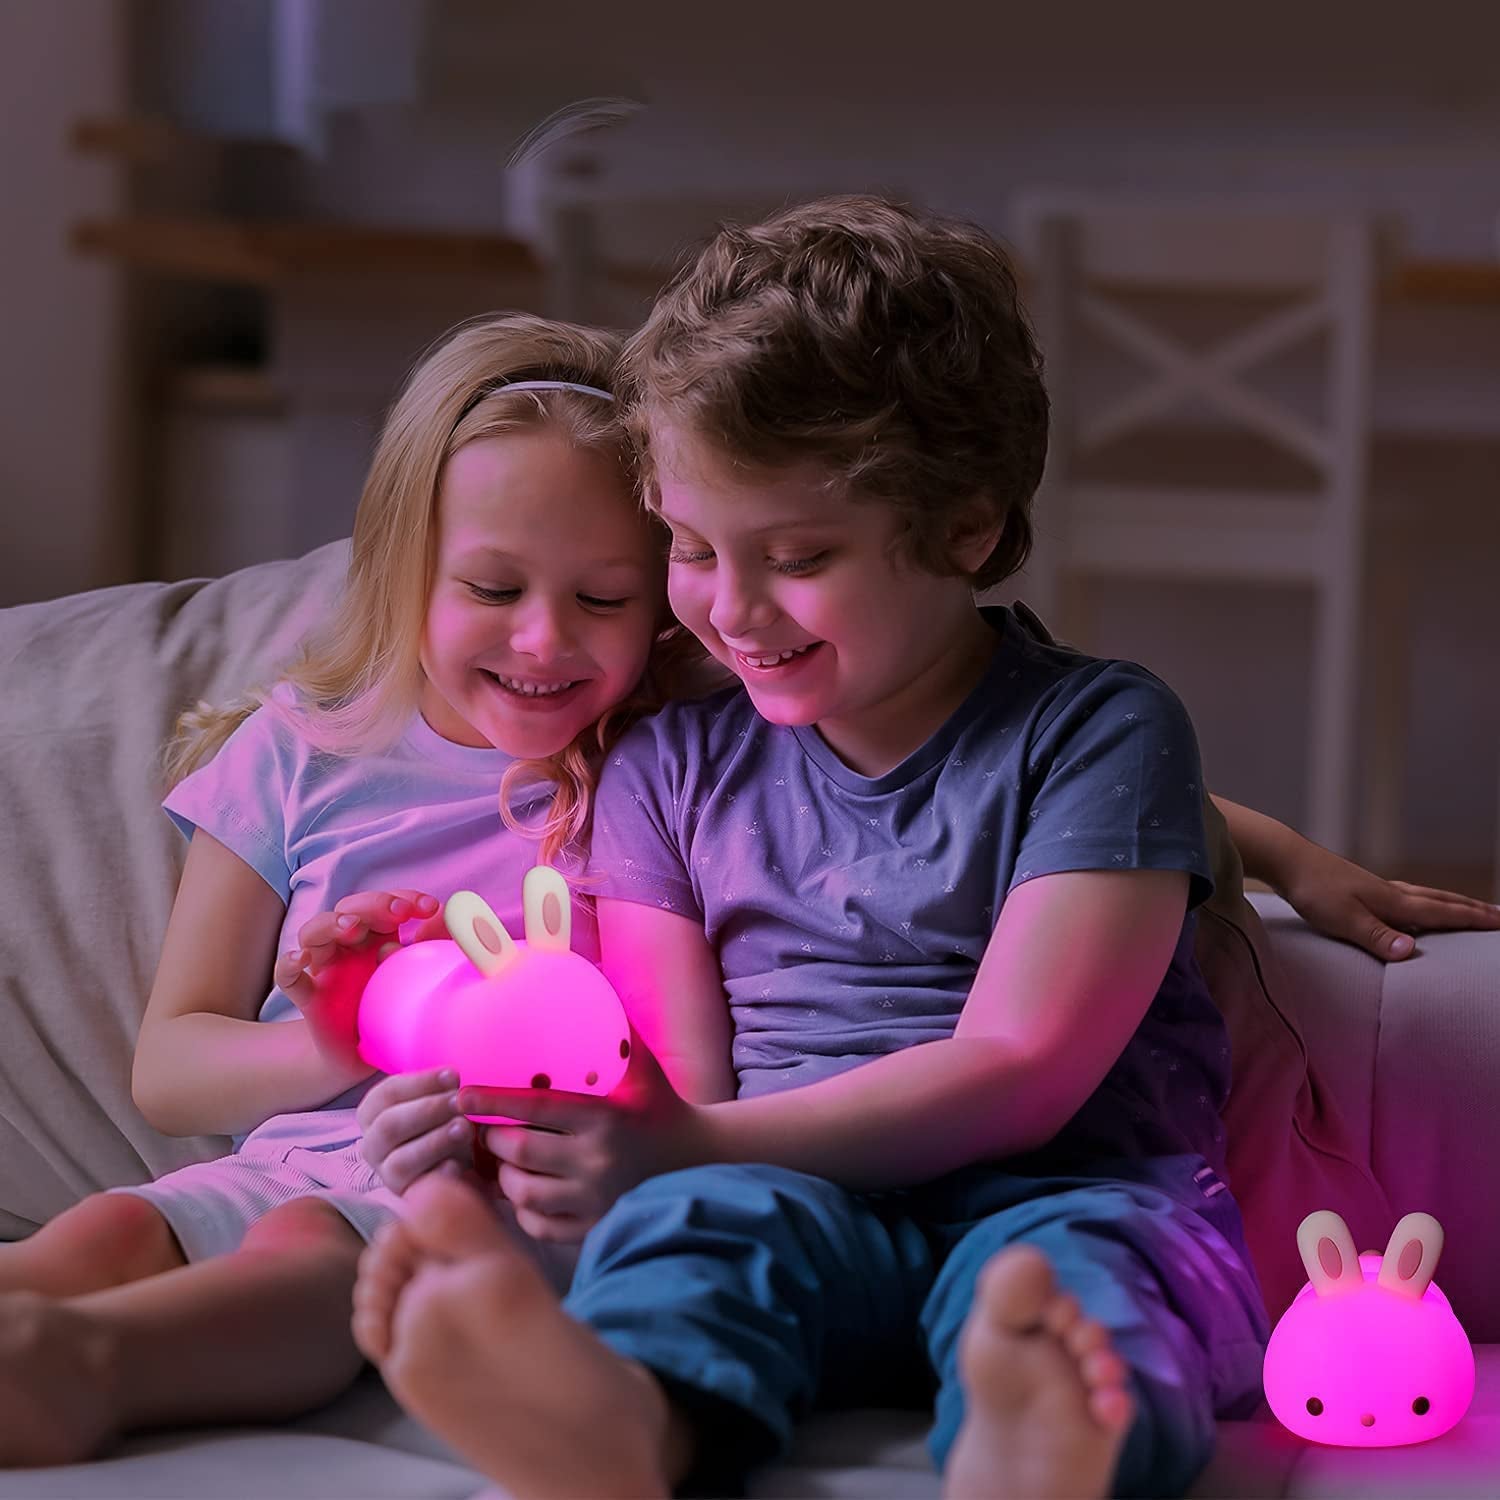 Cute Bunny Kids Night Light for Kids,16 Colors Kawaii Night Lights for Kids Room, Rechargeable Cute Lamp Baby Night Light,Tap FUN Cute Stuff for Teen Girls,Nightlights for Children Cute Gifts